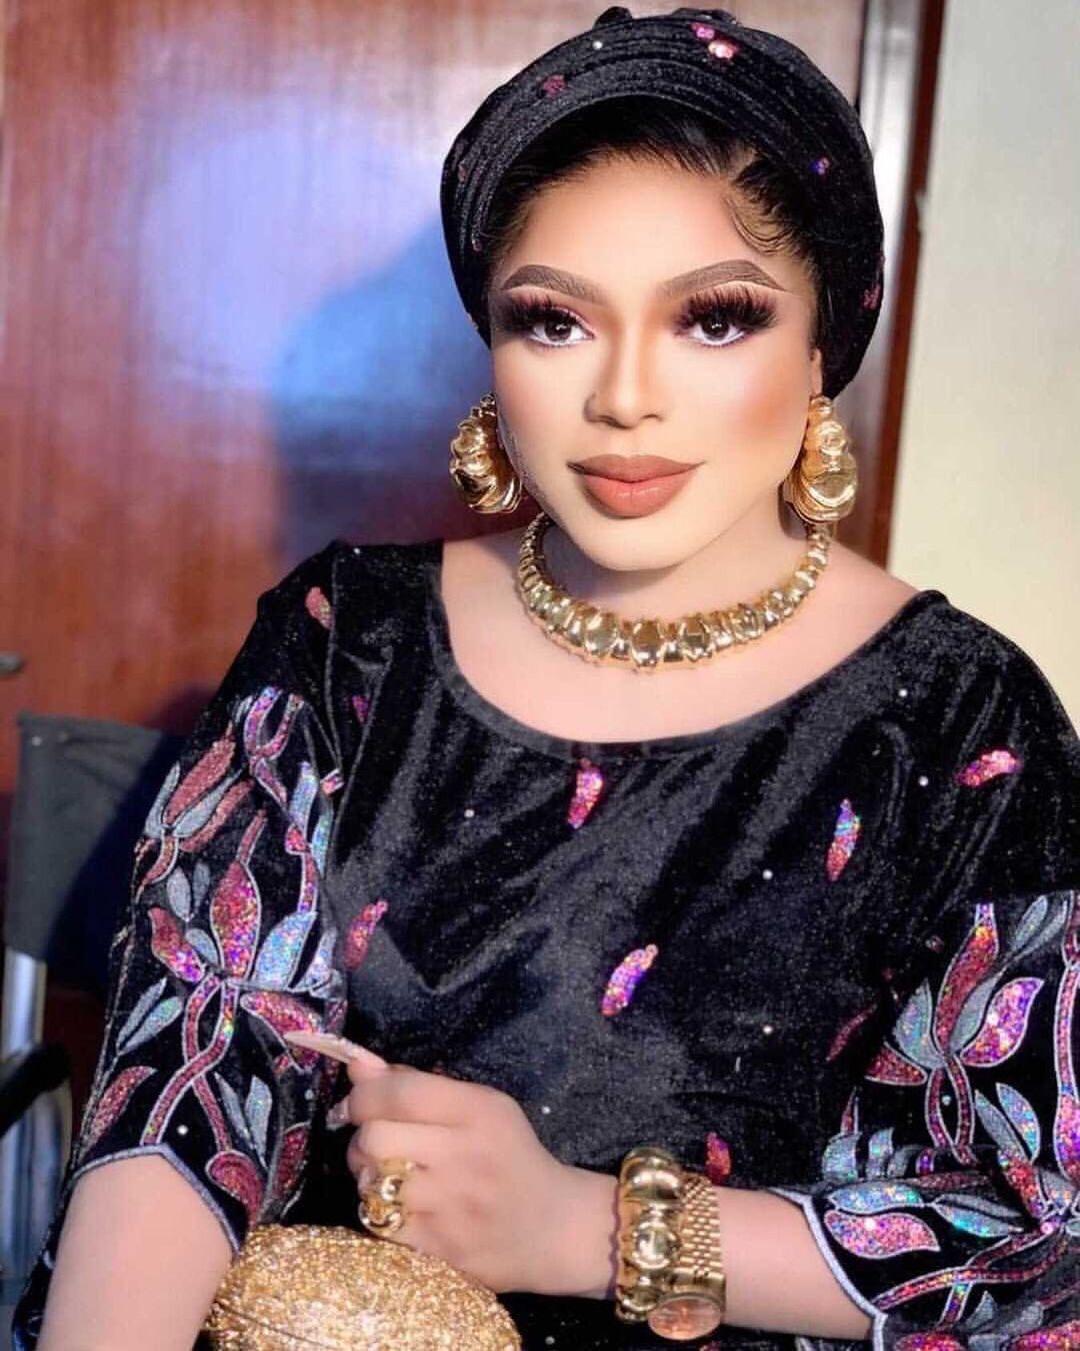 Cross-dresser, Bobrisky opens up on what to expect on his 30th birthday